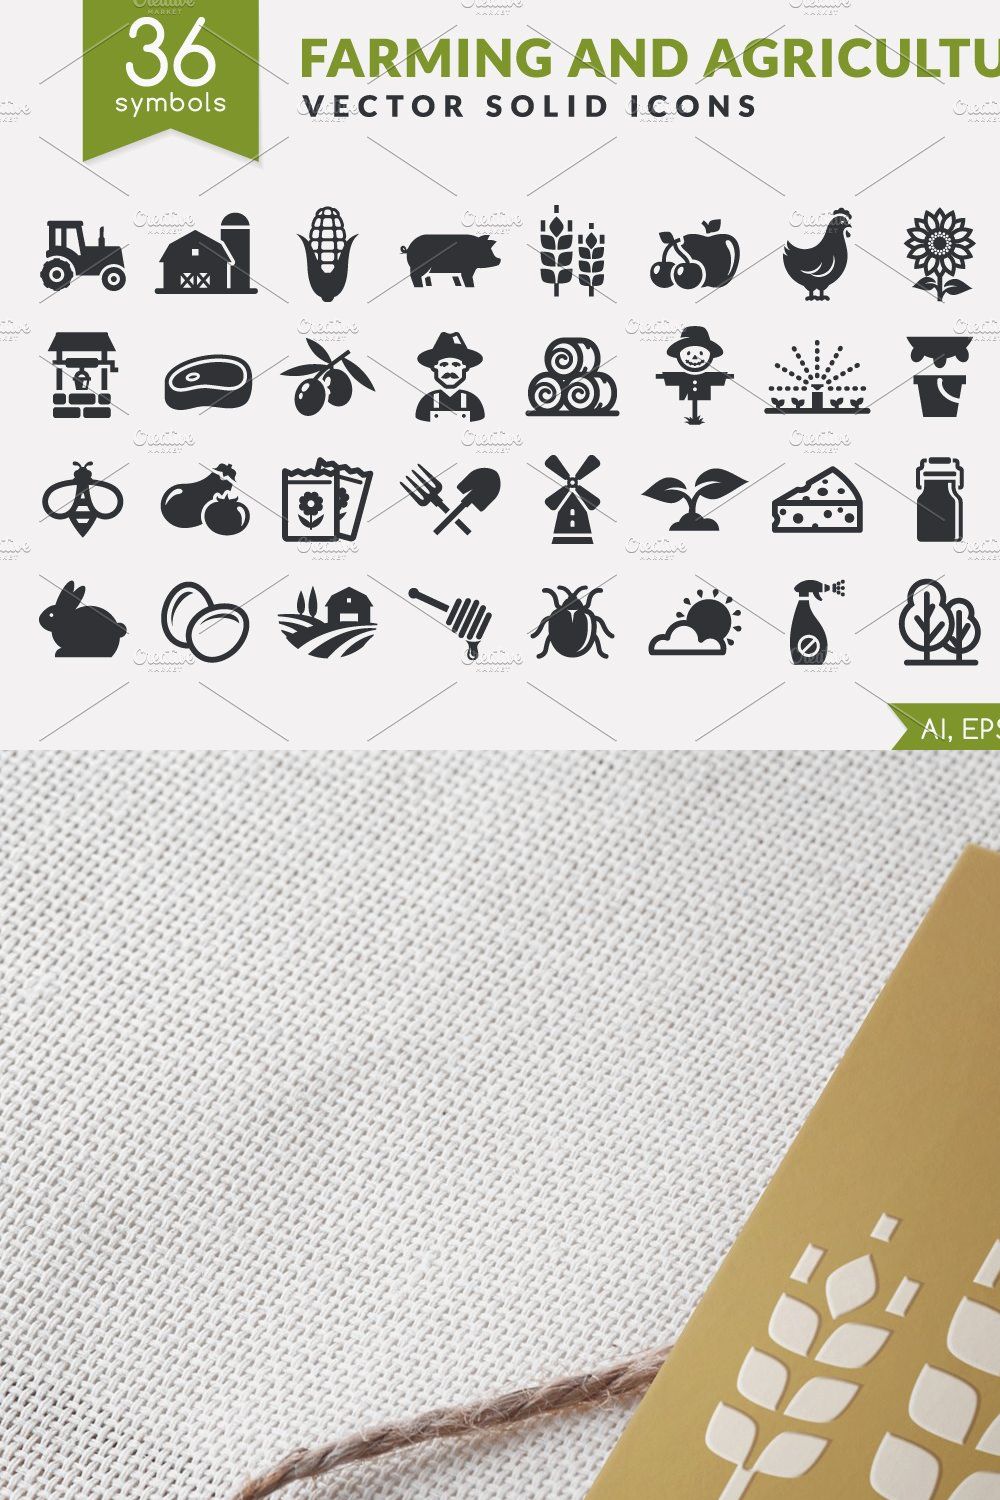 Farm and agriculture icons pinterest preview image.